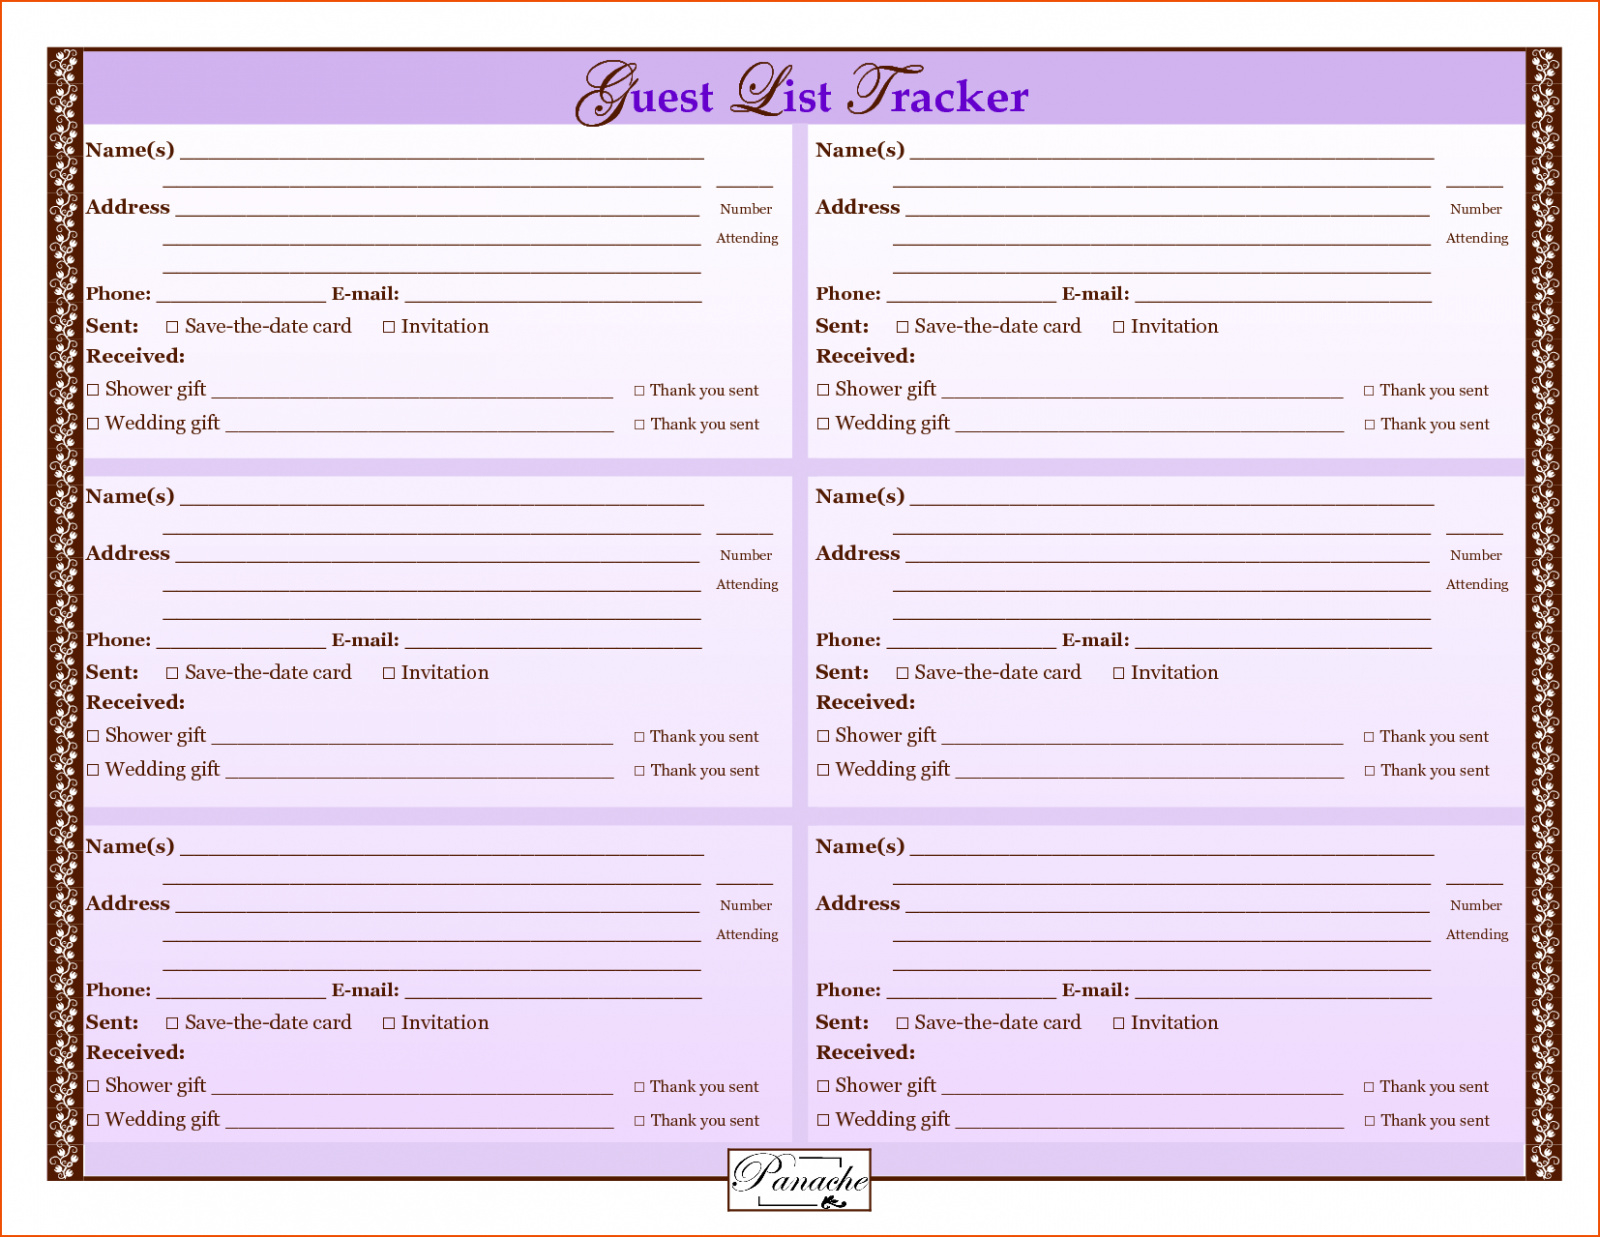 wedding-planning-excel-spreadsheet-in-guest-list-template-excel-lovely